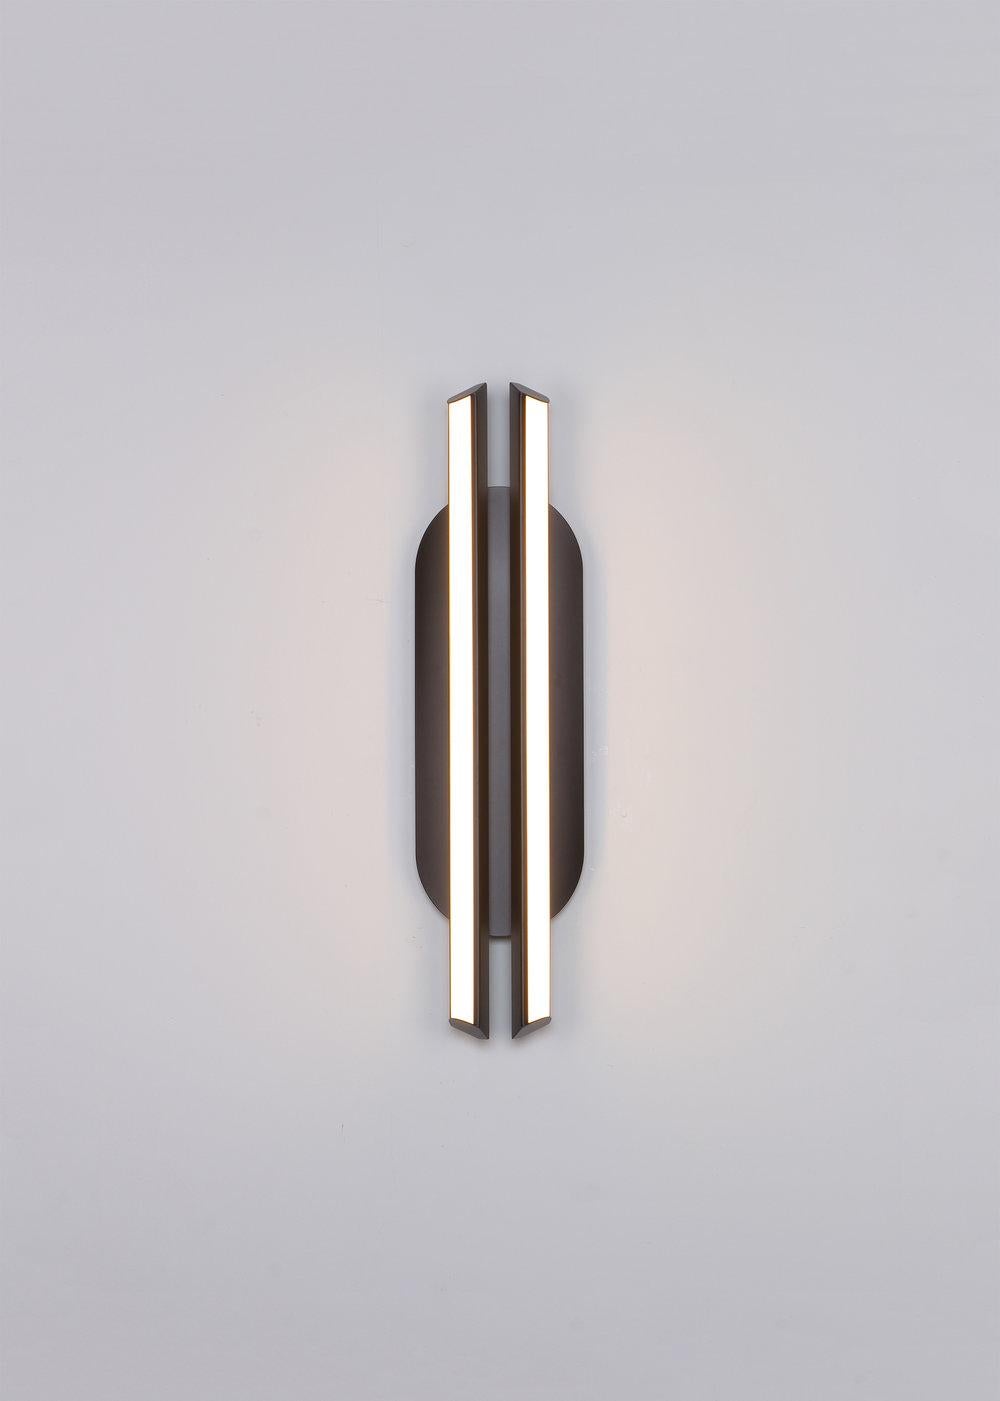 Chime Capsule sconce balances two parallel bars of soft light over a gently curved backplate. The Chime series was inspired by the harmonious sound of resonating bells. Chime Capsule provides ample light into a room while also washing light across a